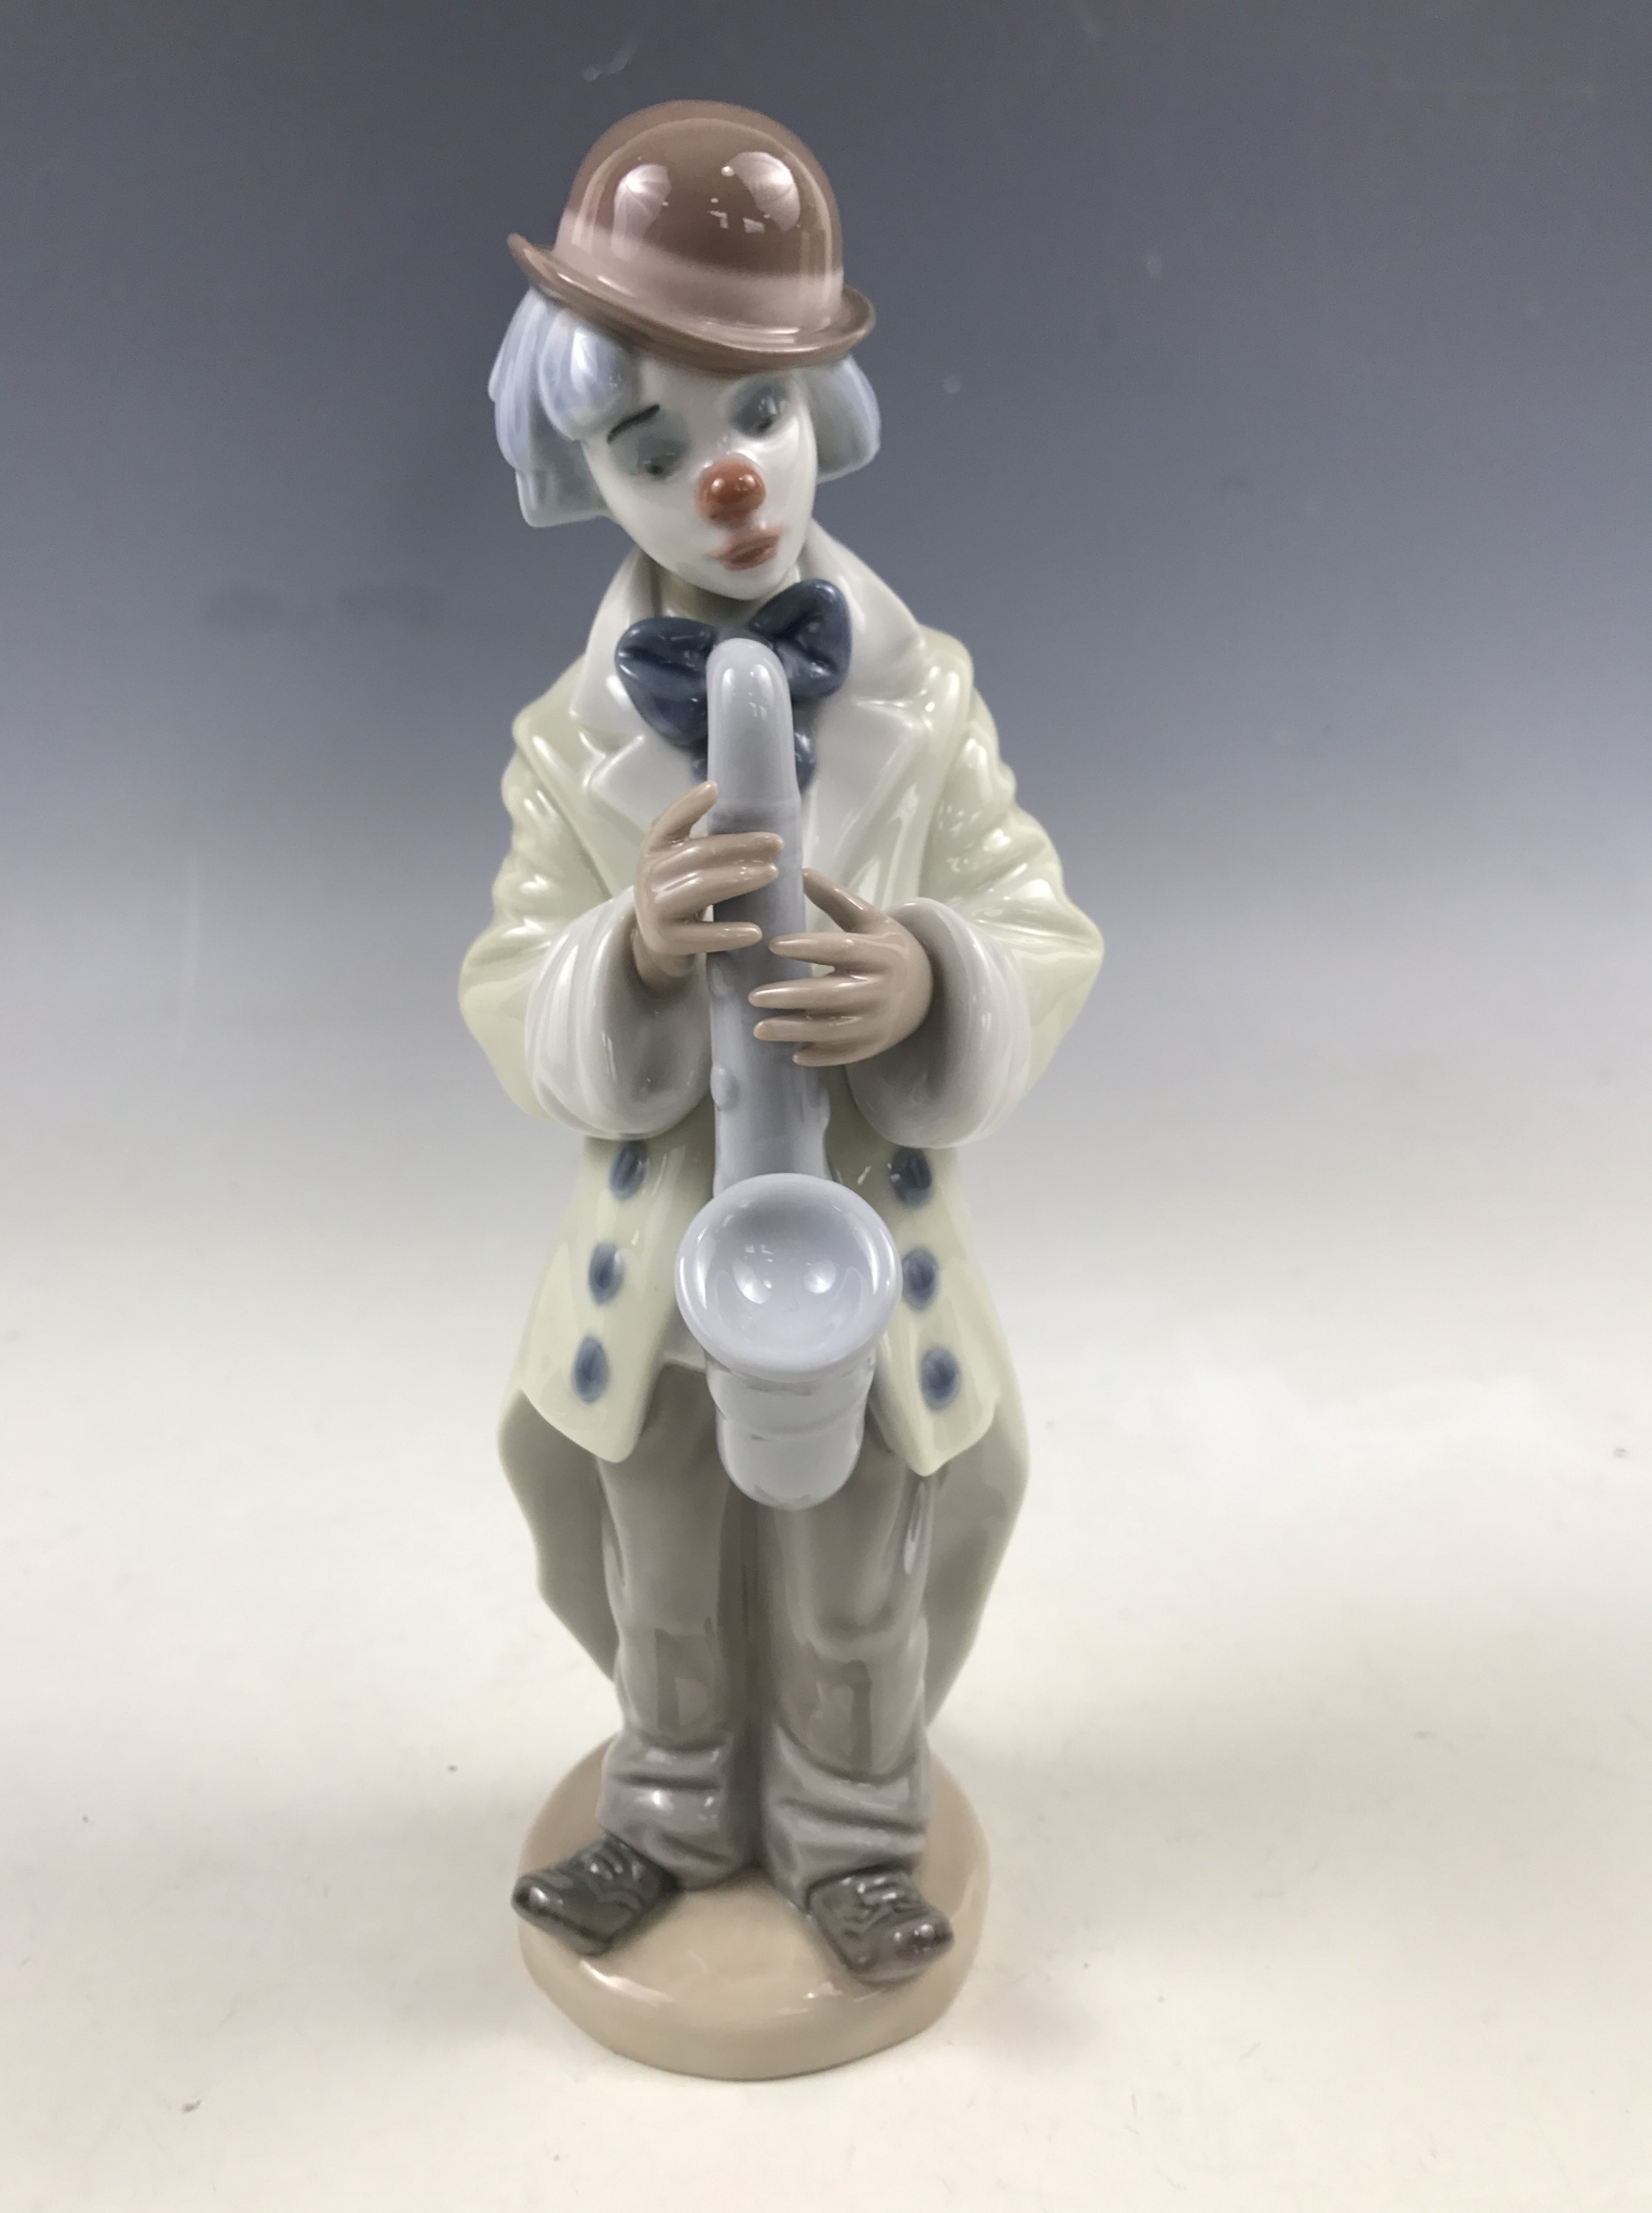 A Lladro figurine modelled as a clown with a saxophone, model 3471, 23 cm